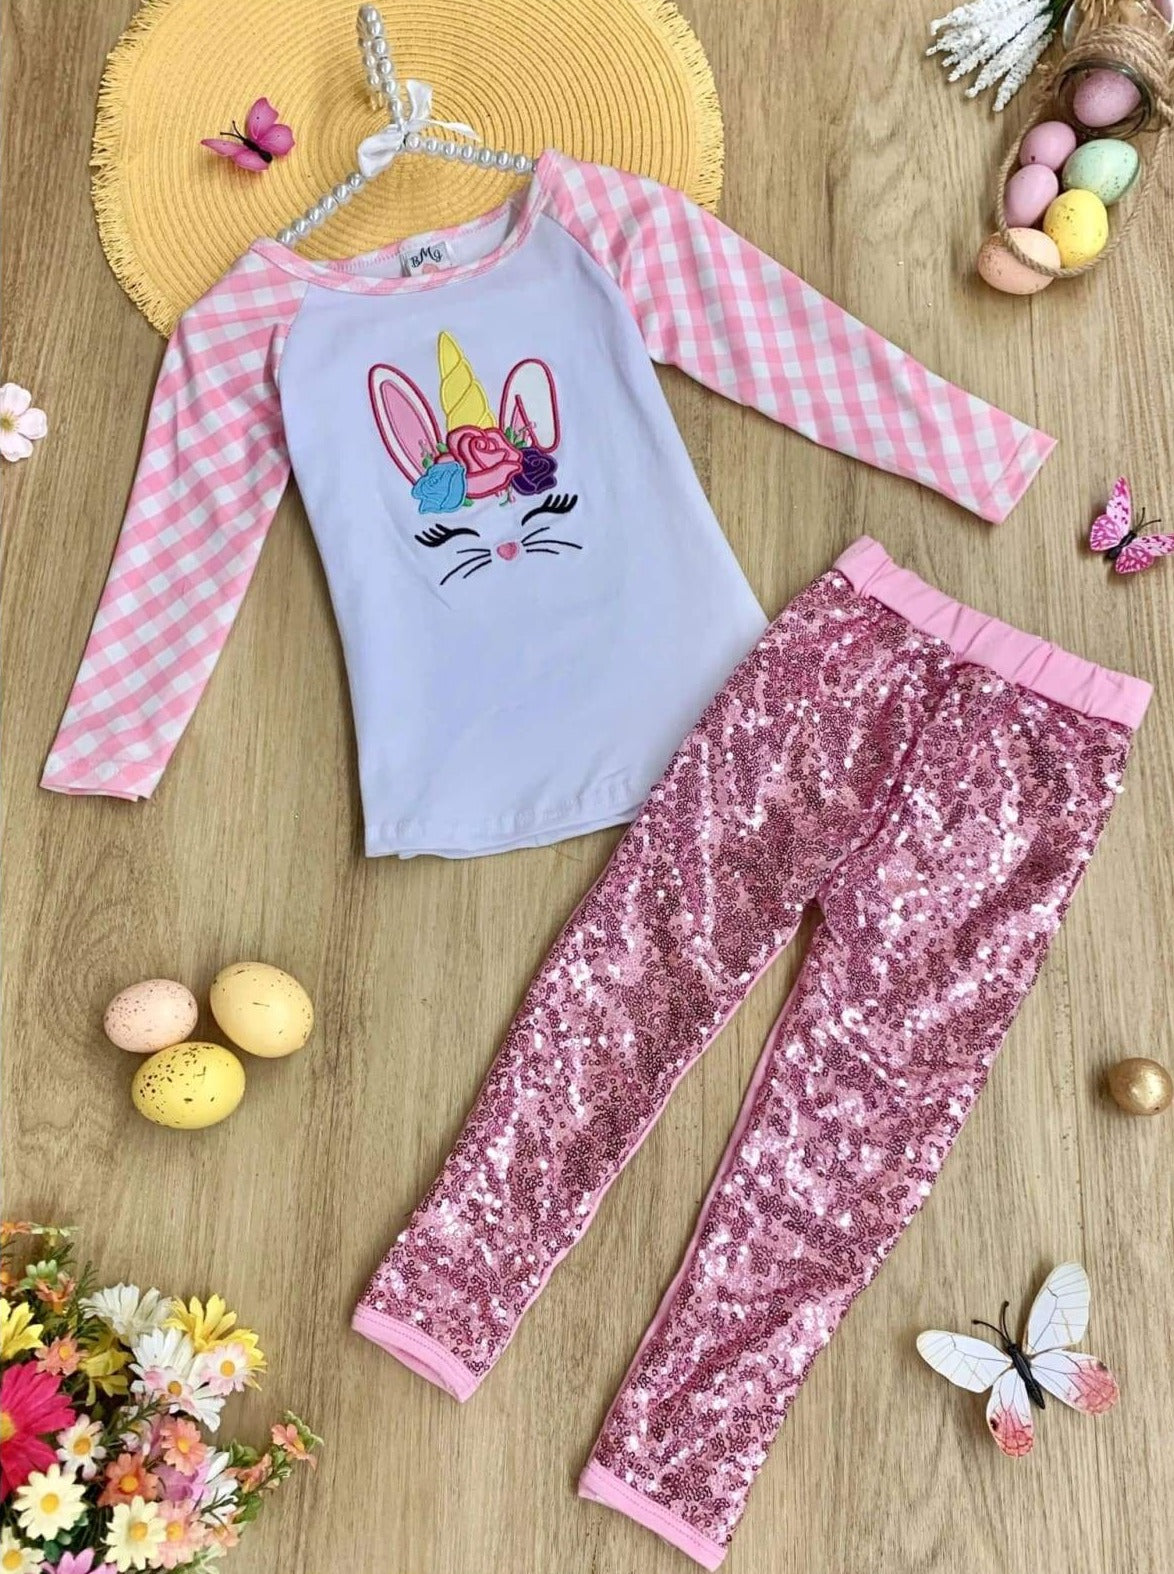 Girls Spring set features raglan floral or plaid sleeves, Easter-themed applique top with stretchy sequin leggings for 2T to 10Y for toddlers and girls